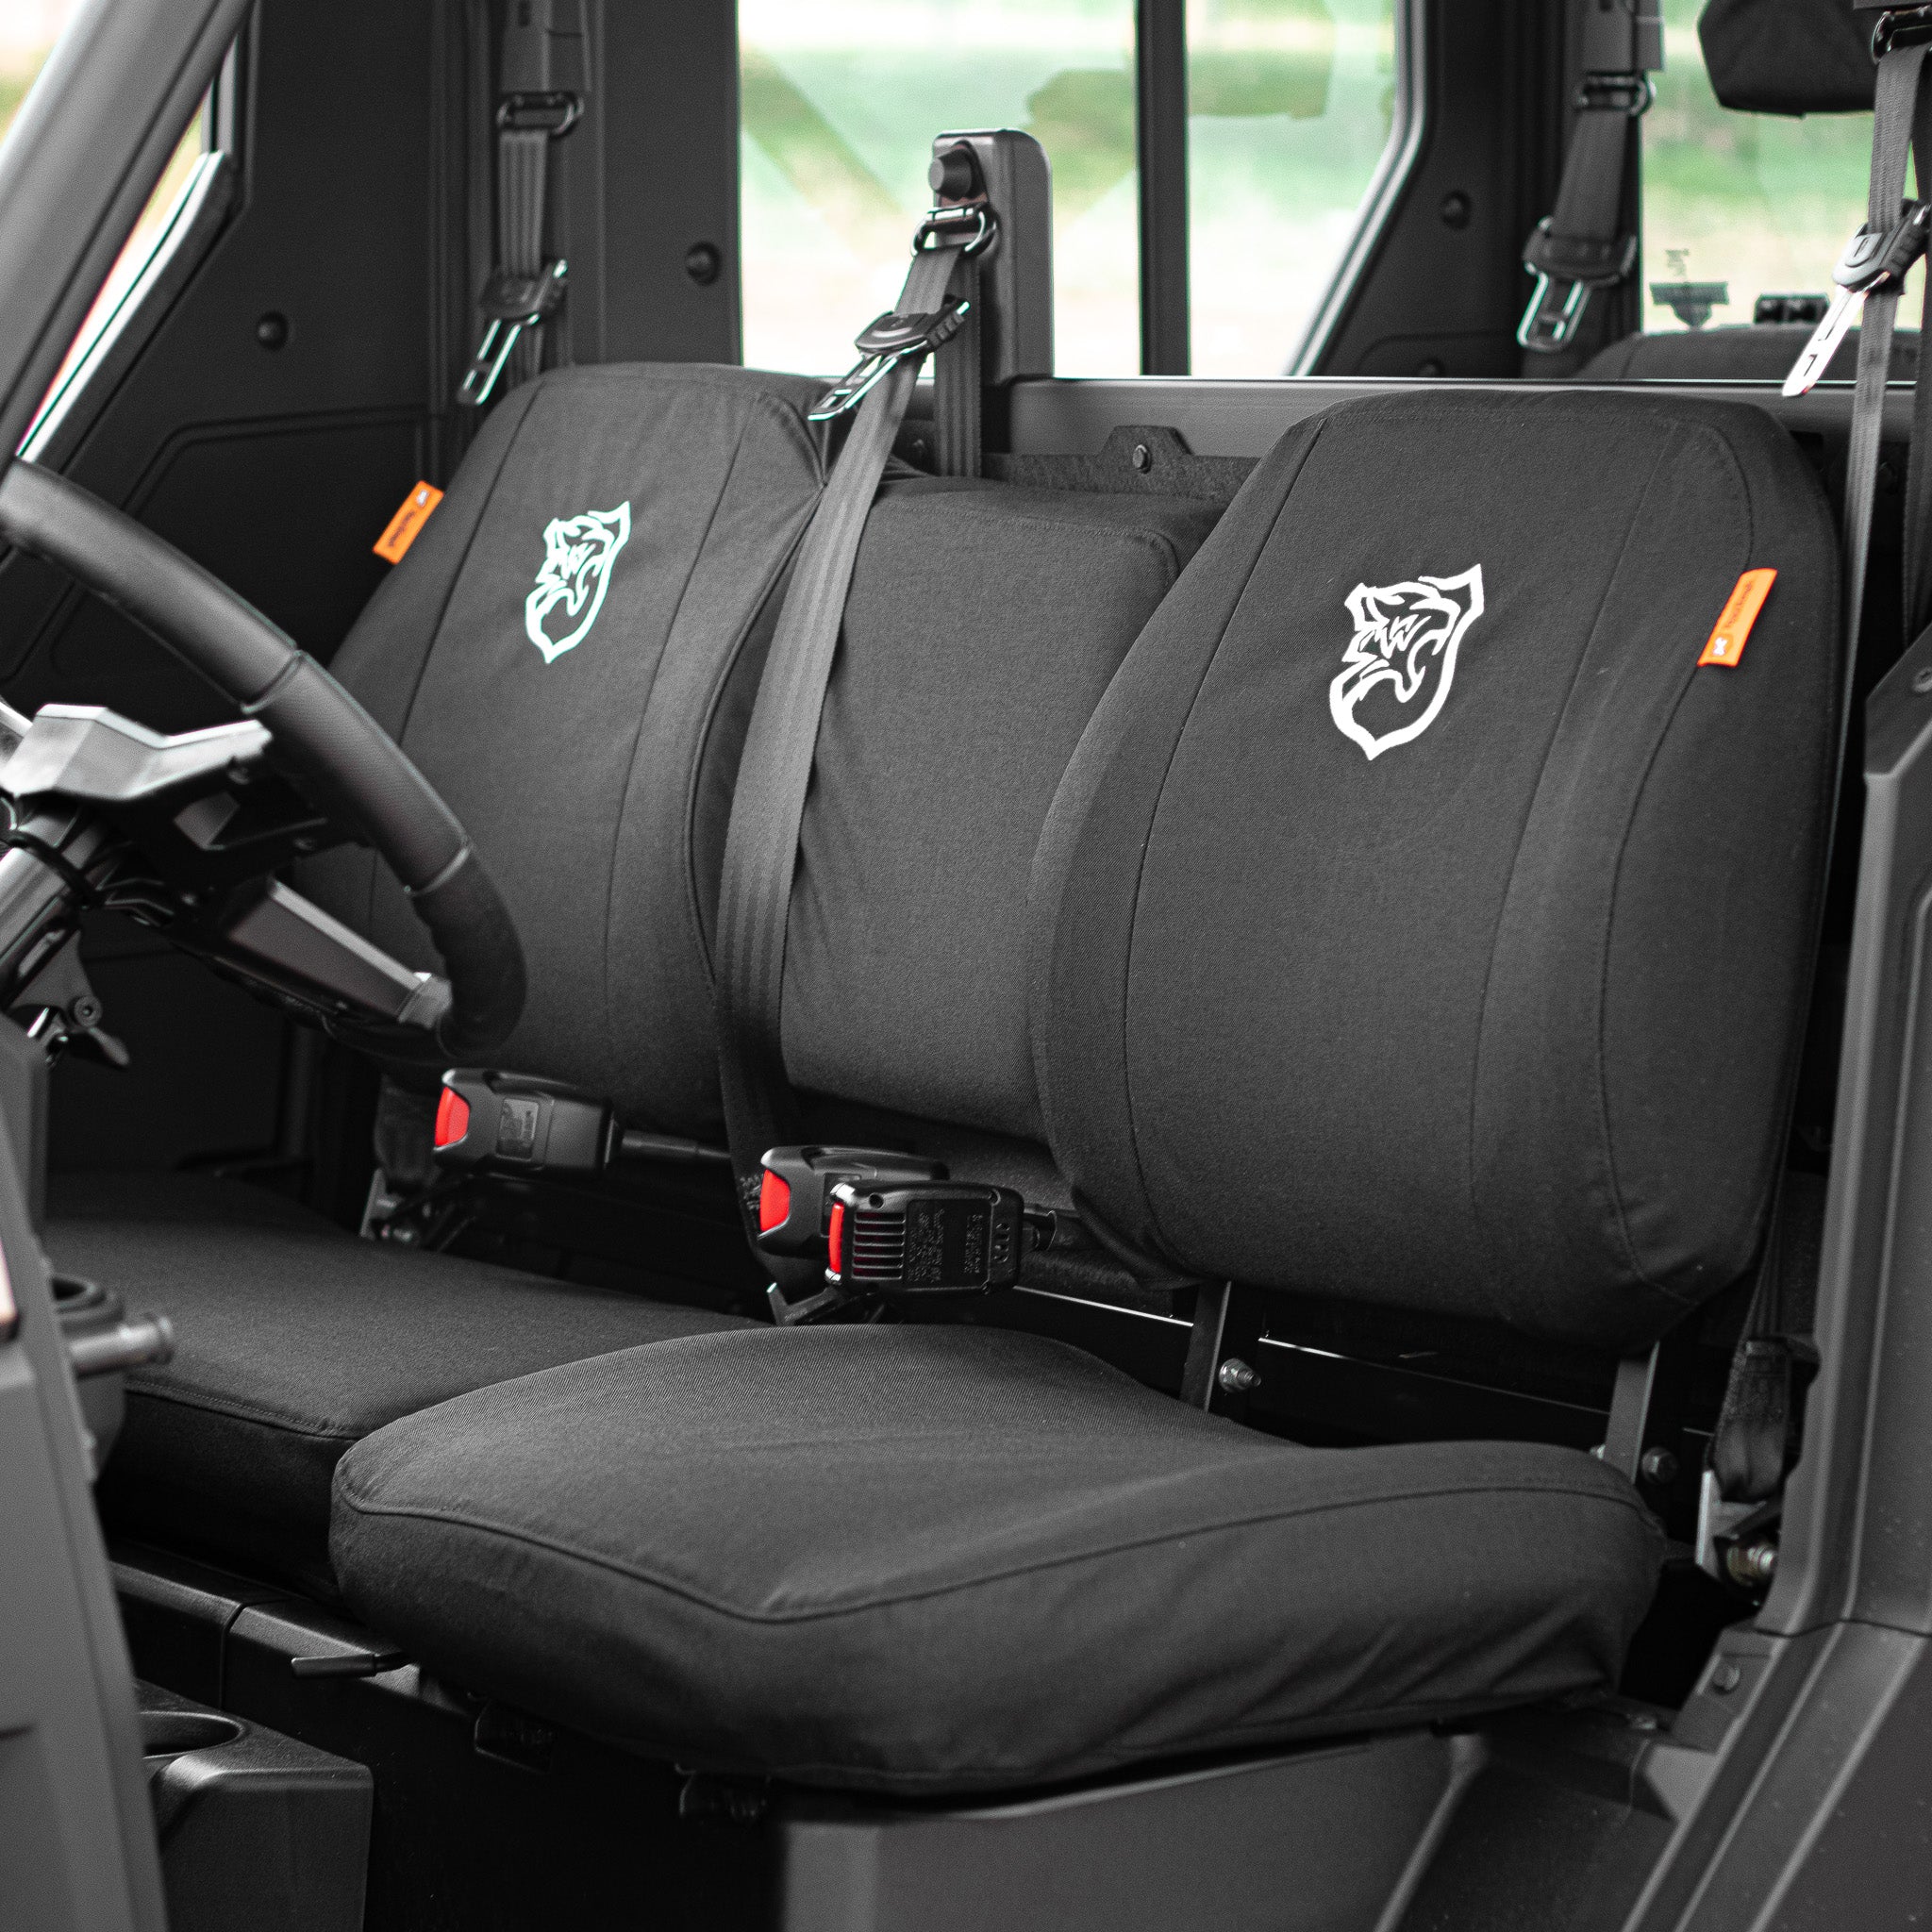 TigerTough Seat Covers in a Polaris Ranger side-by-side. TigerTough has seat covers for common side-by-sides, ATVs, and UTVs to protect their seats from the elements and the wear and tear of hard use. This set has the optional embroidery on the seat backs.